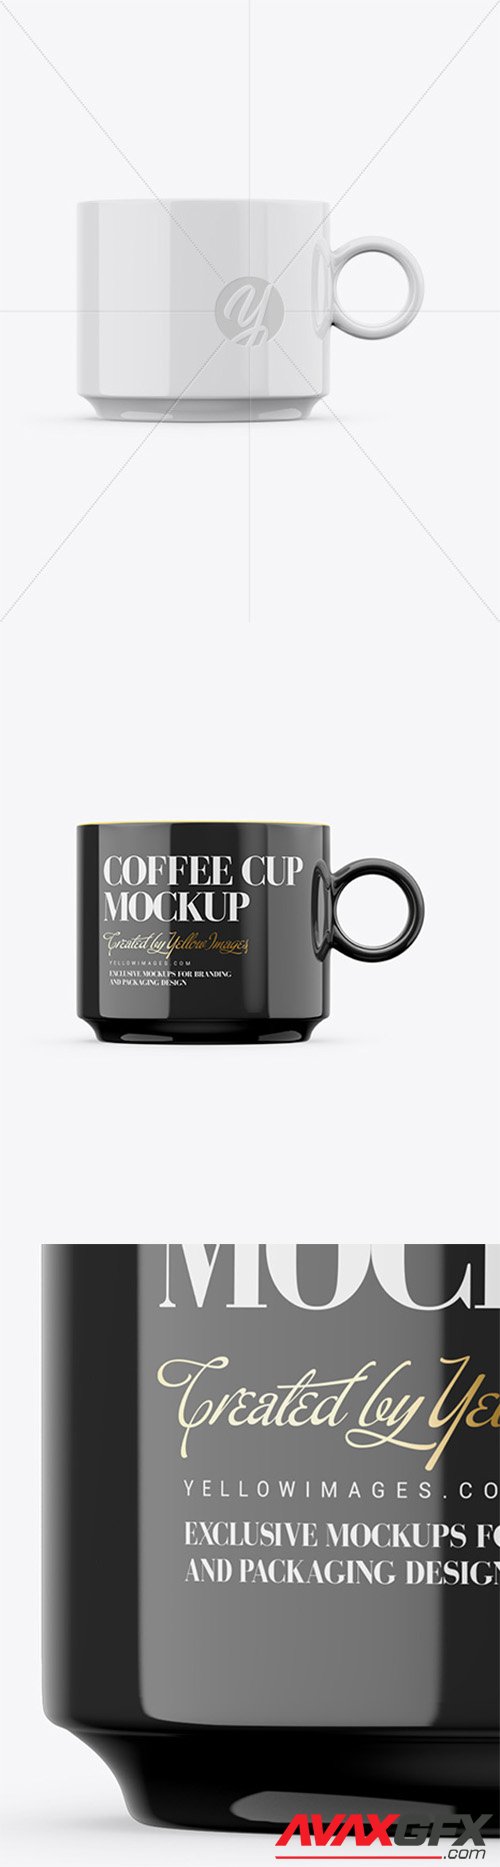 Download Glossy Coffee Cup Mockup Front View 26660 Avaxgfx All Downloads That You Need In One Place Graphic From Nitroflare Rapidgator PSD Mockup Templates